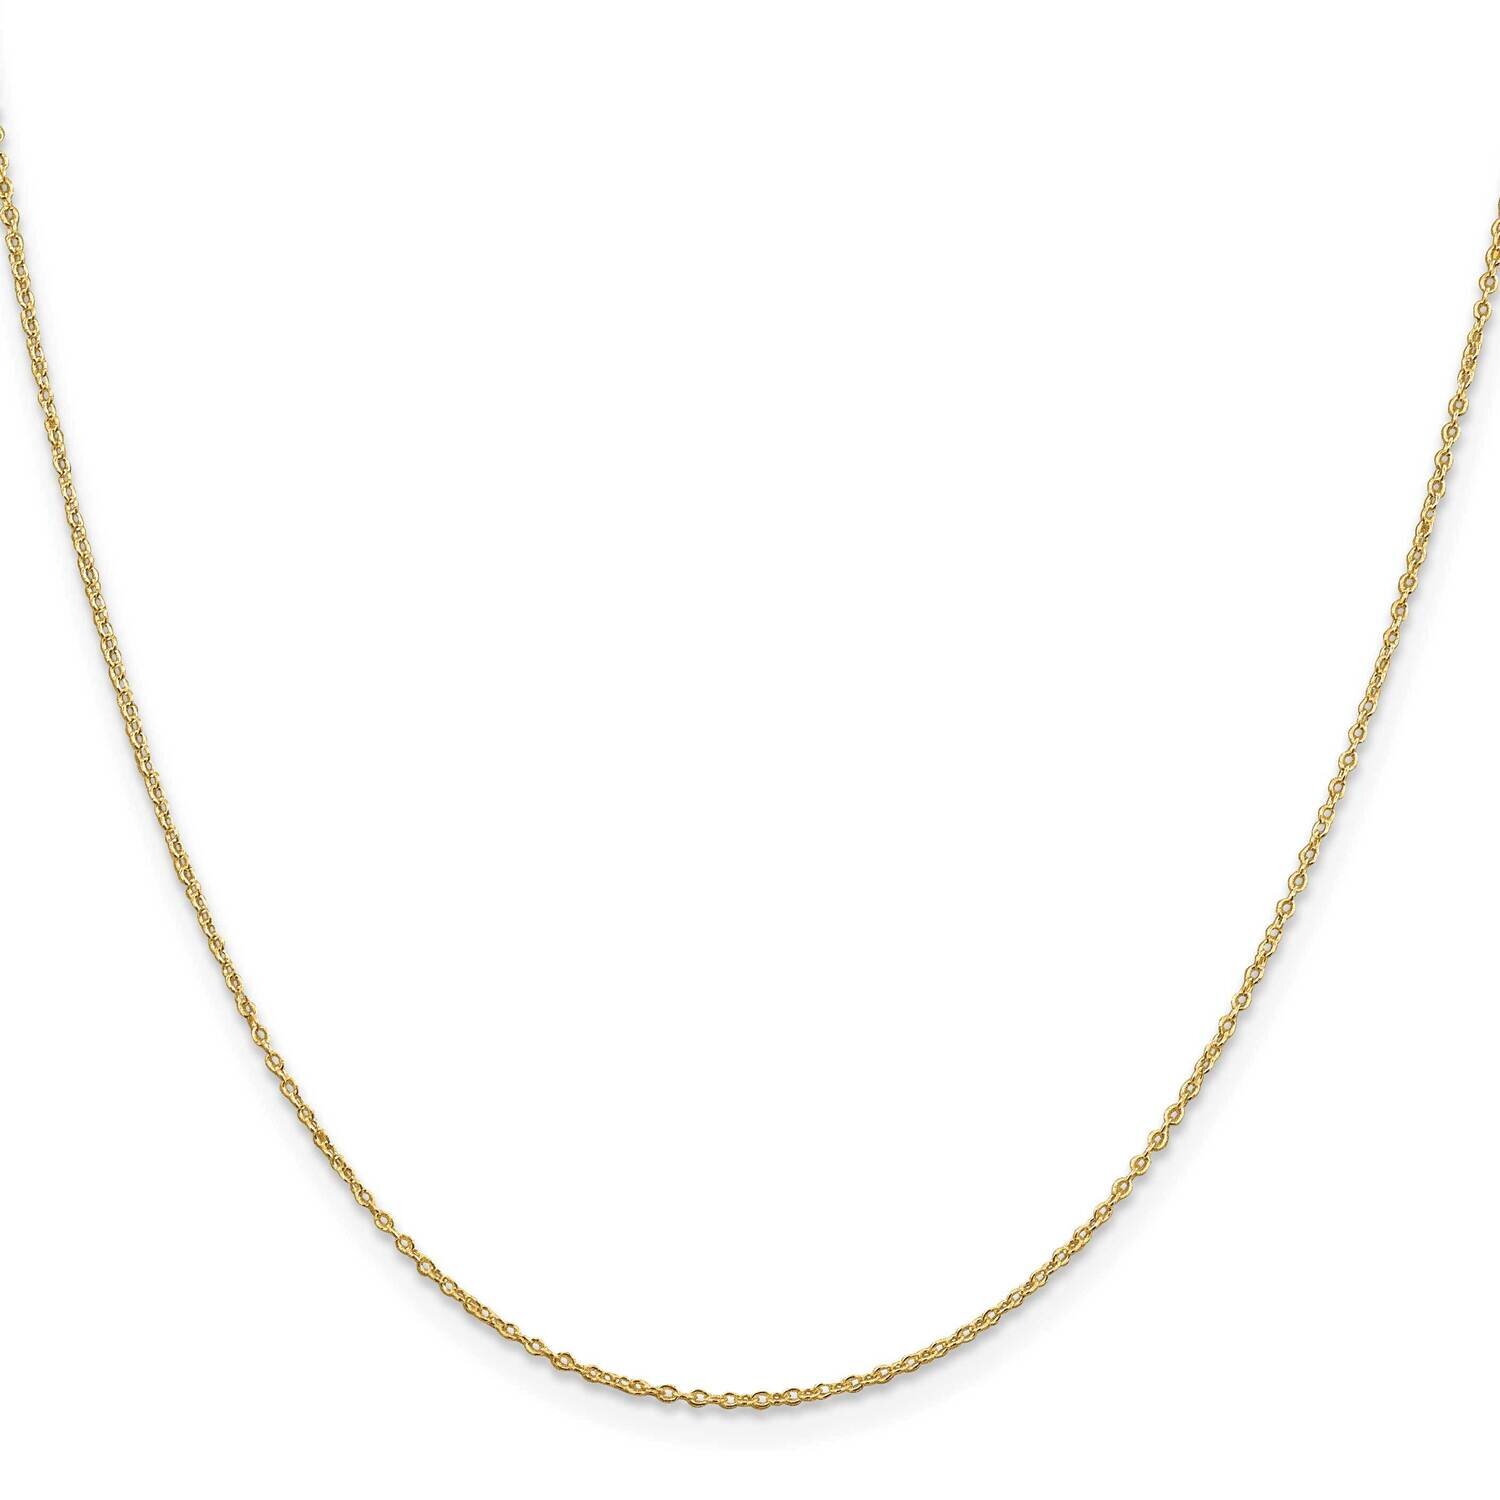 1.10mm Cable Chain Gold-Plated on Sterling Silver QPE45G-18